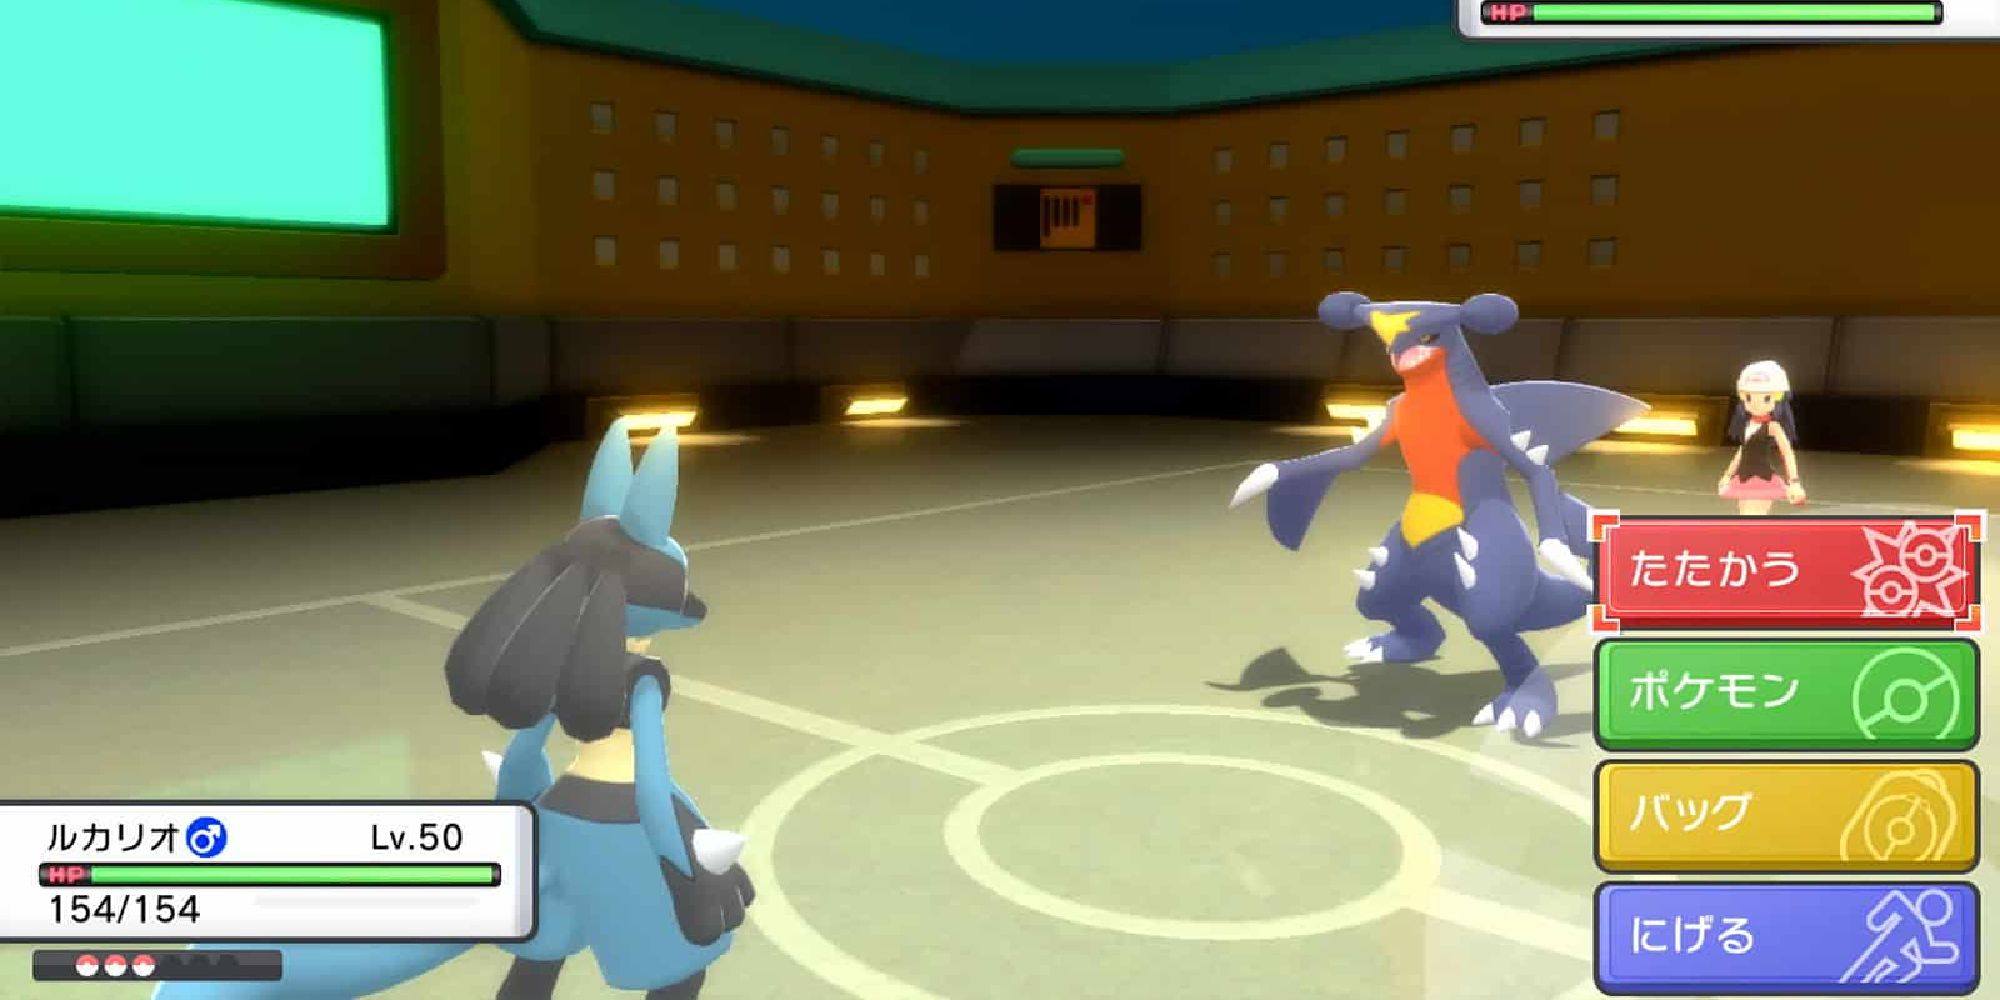 A battle screen in Pokemon Brilliant Diamond & Shining Pearl depicting a battle between Lucario and Garchomp